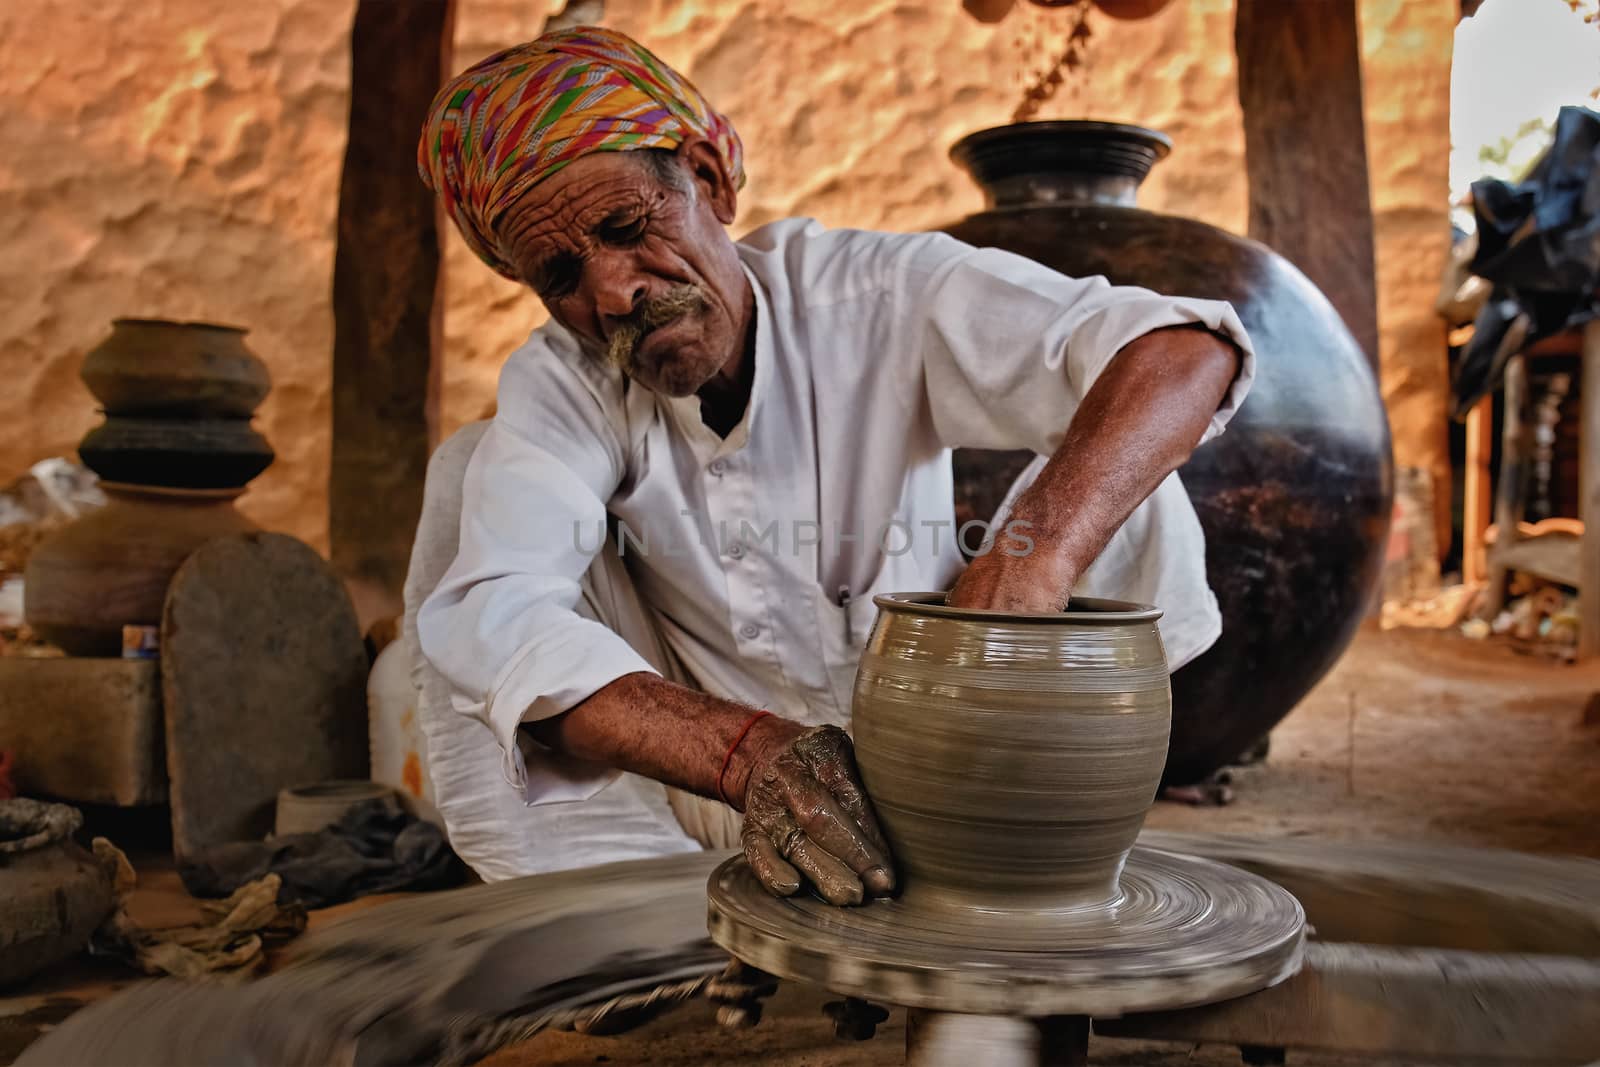 Indian potter at work. Handwork craft from Shilpagram, Udaipur, Rajasthan, India by dimol